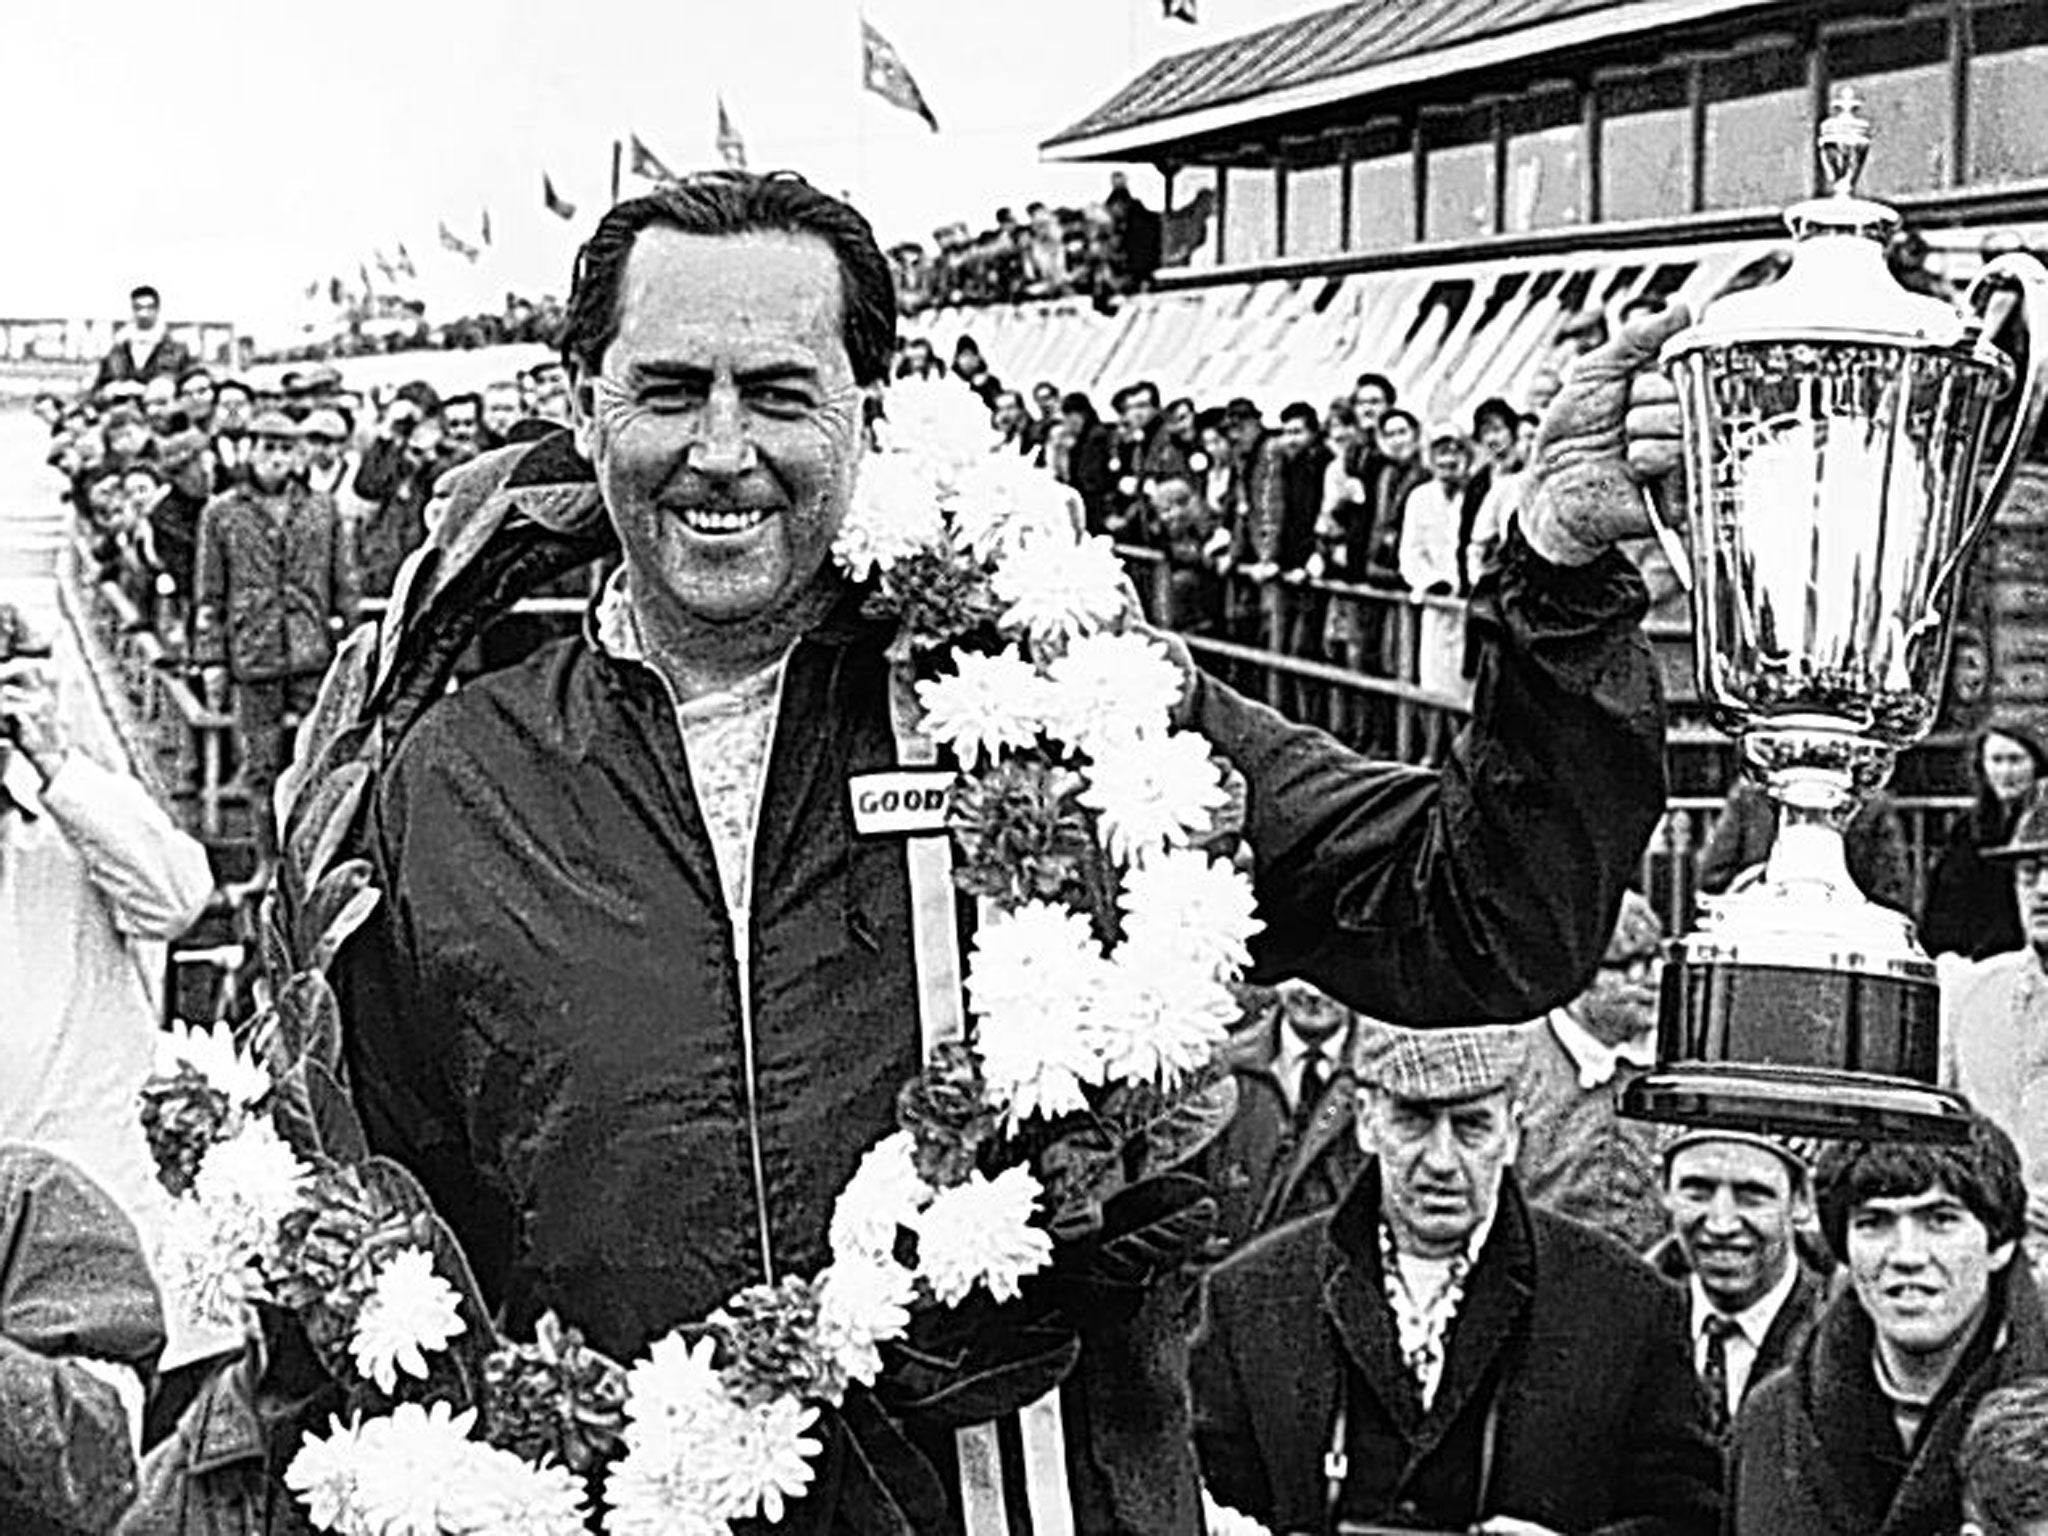 Brabham in 1969 after winning the International Trophy
Race at Silverstone